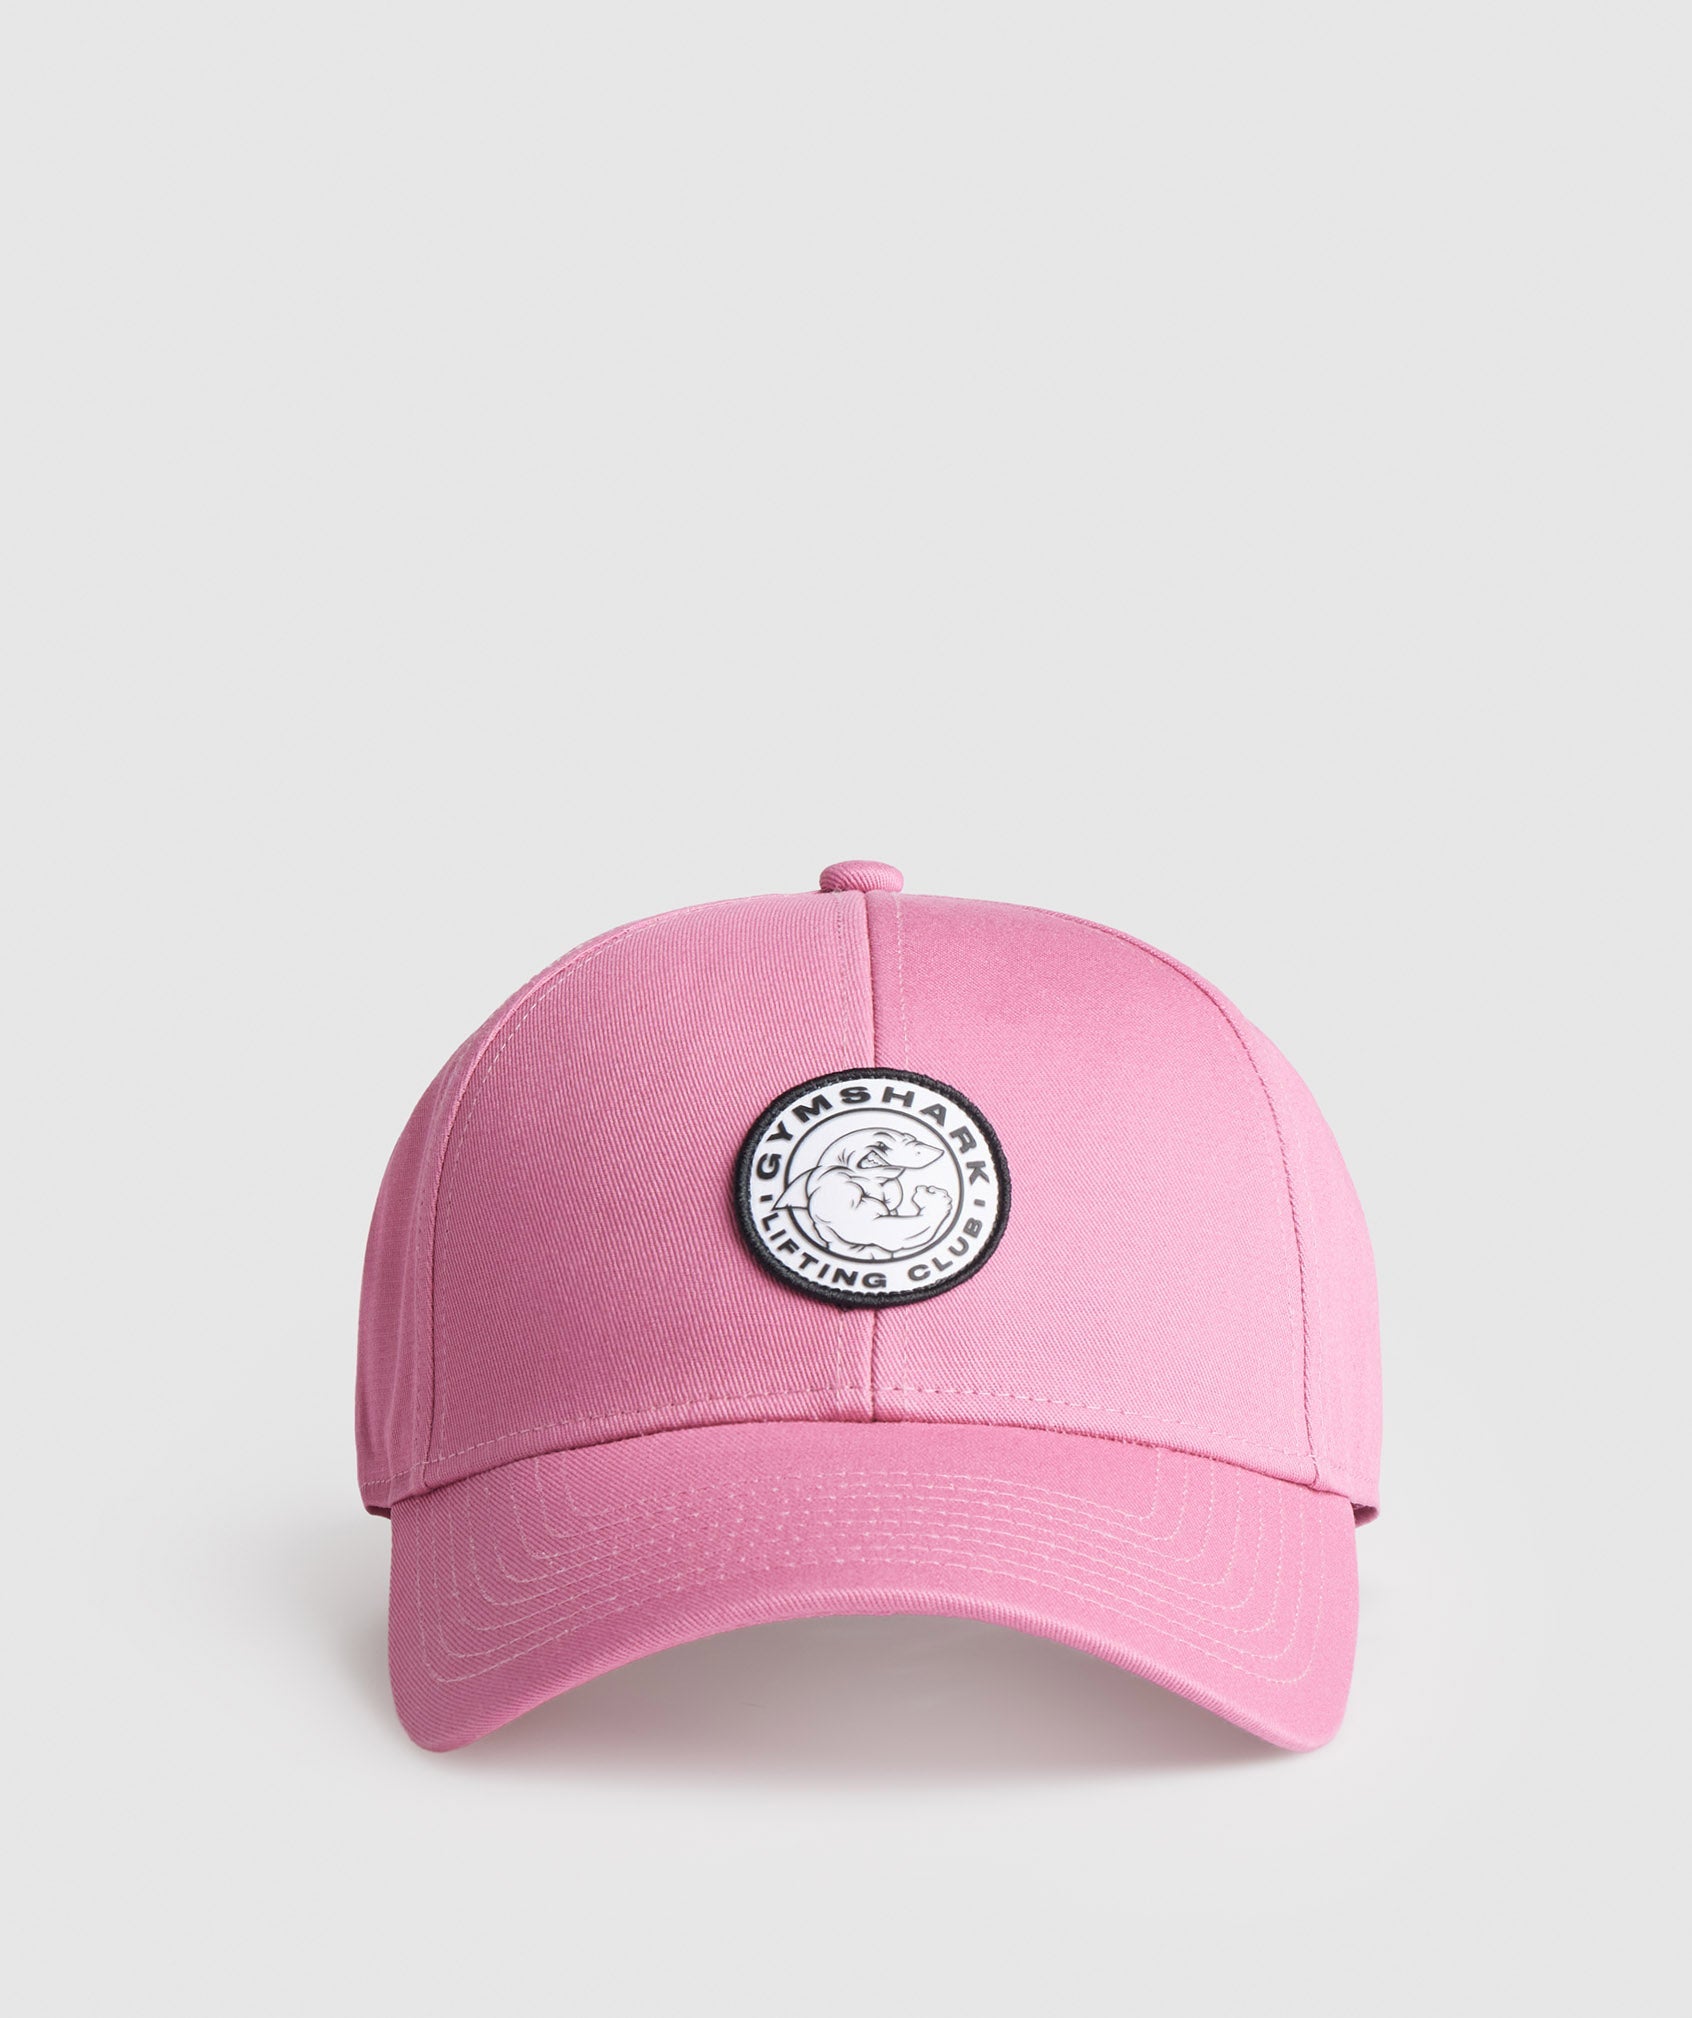 Legacy Cap in Blossom Pink - view 1